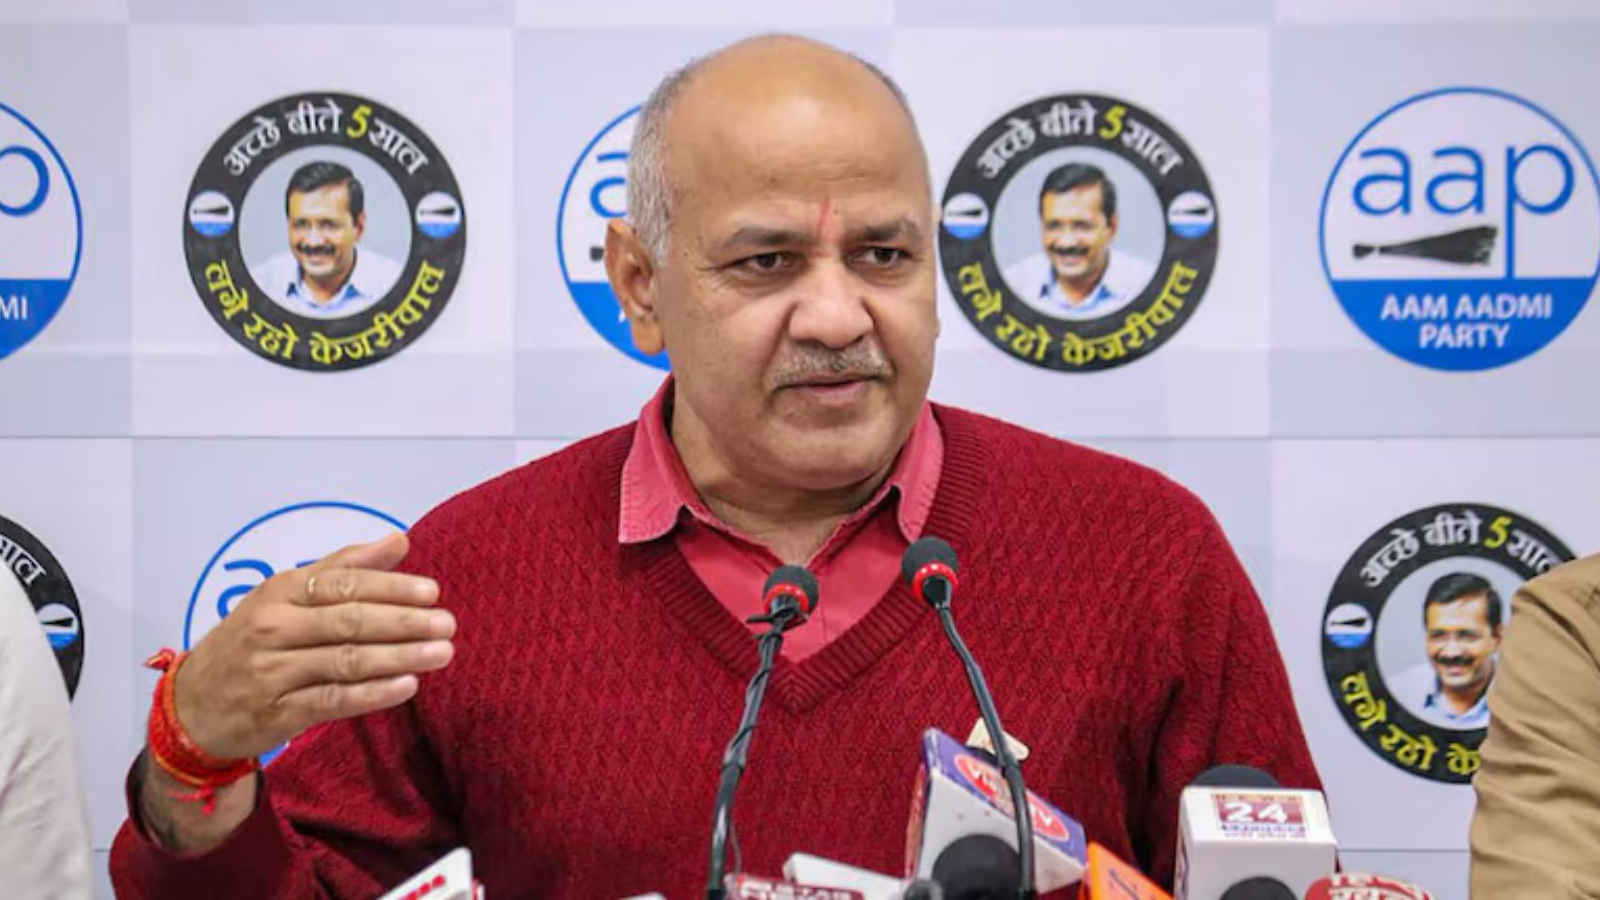 Court Reserves Order on Manish Sisodia’s Bail Pleas in Delhi Excise Policy Case